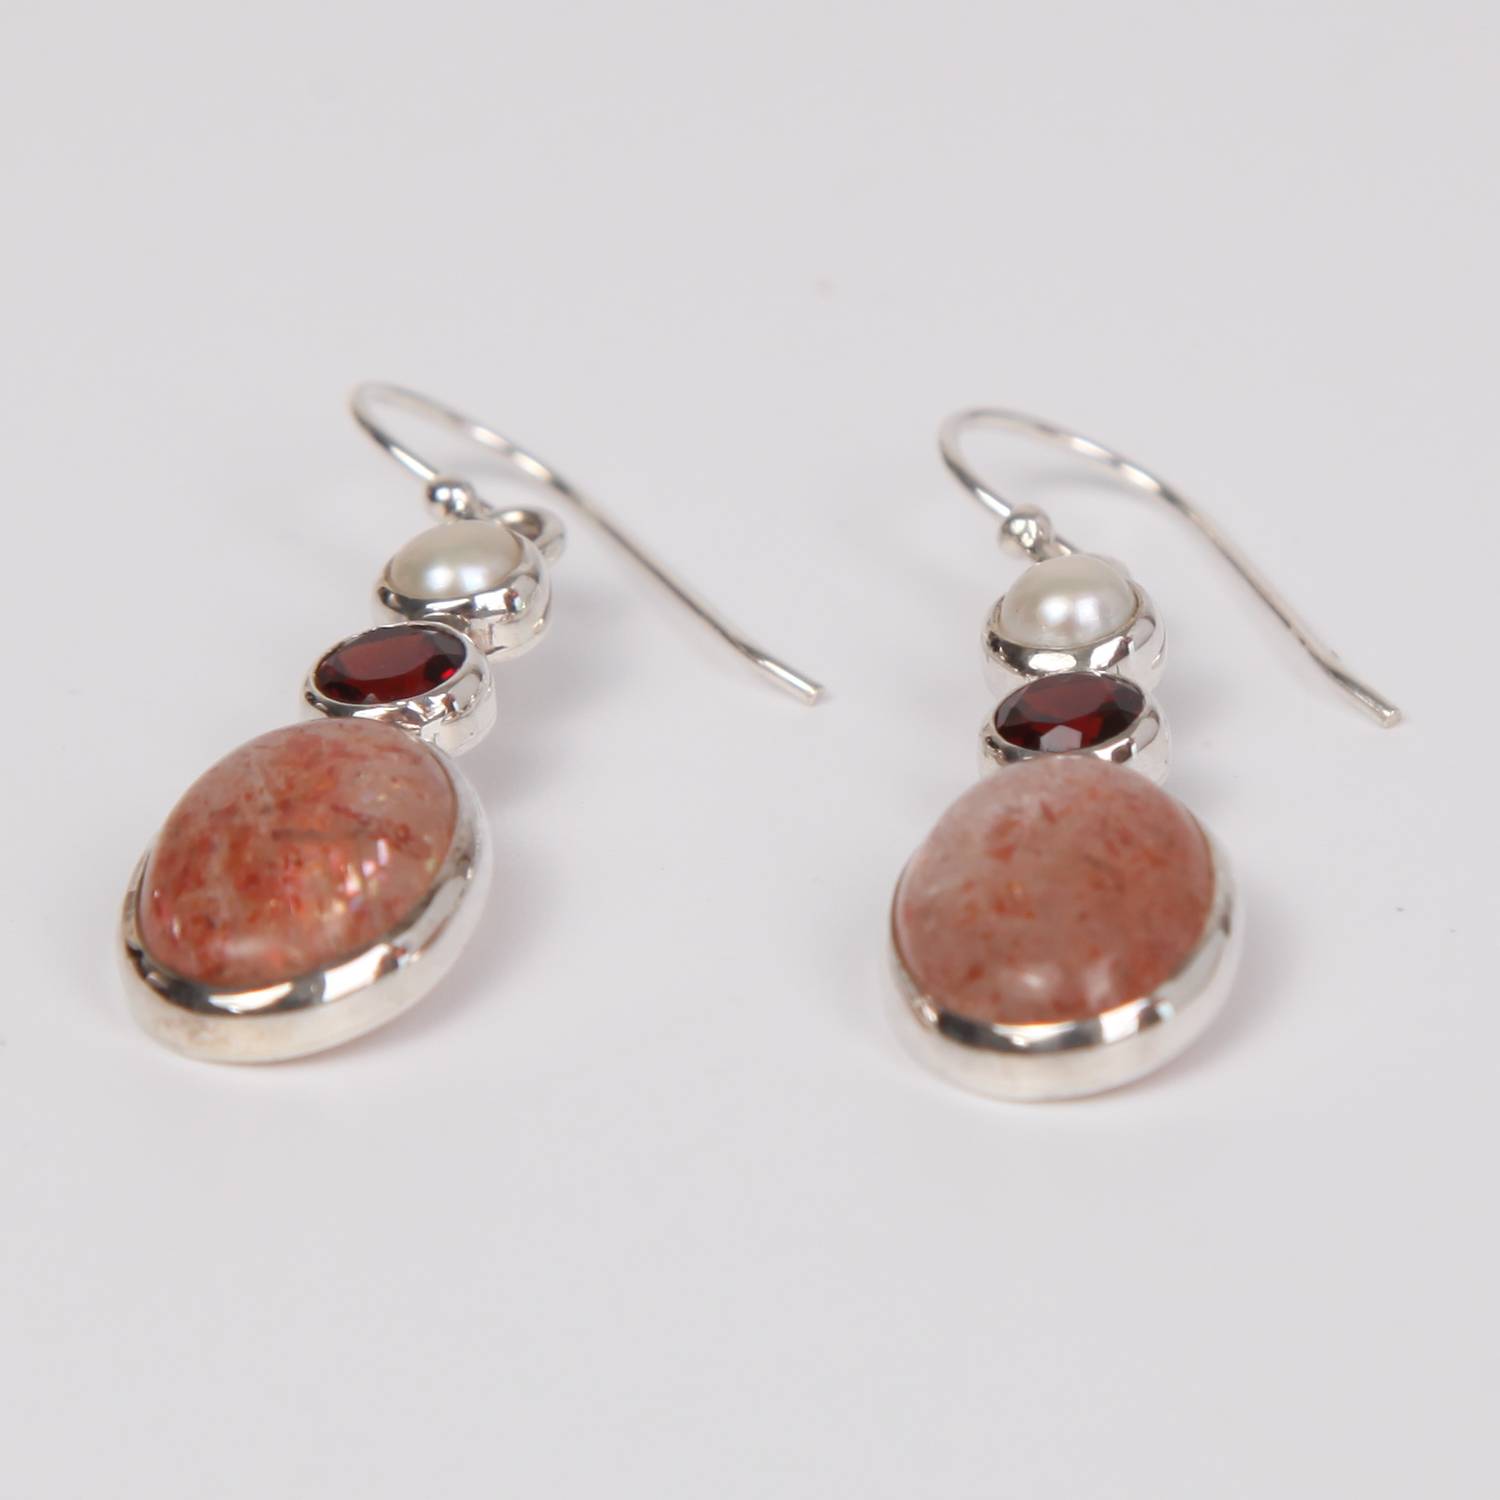 Sun stone Sterling Silver Earrings with Garnet and Fresh Water Pearl